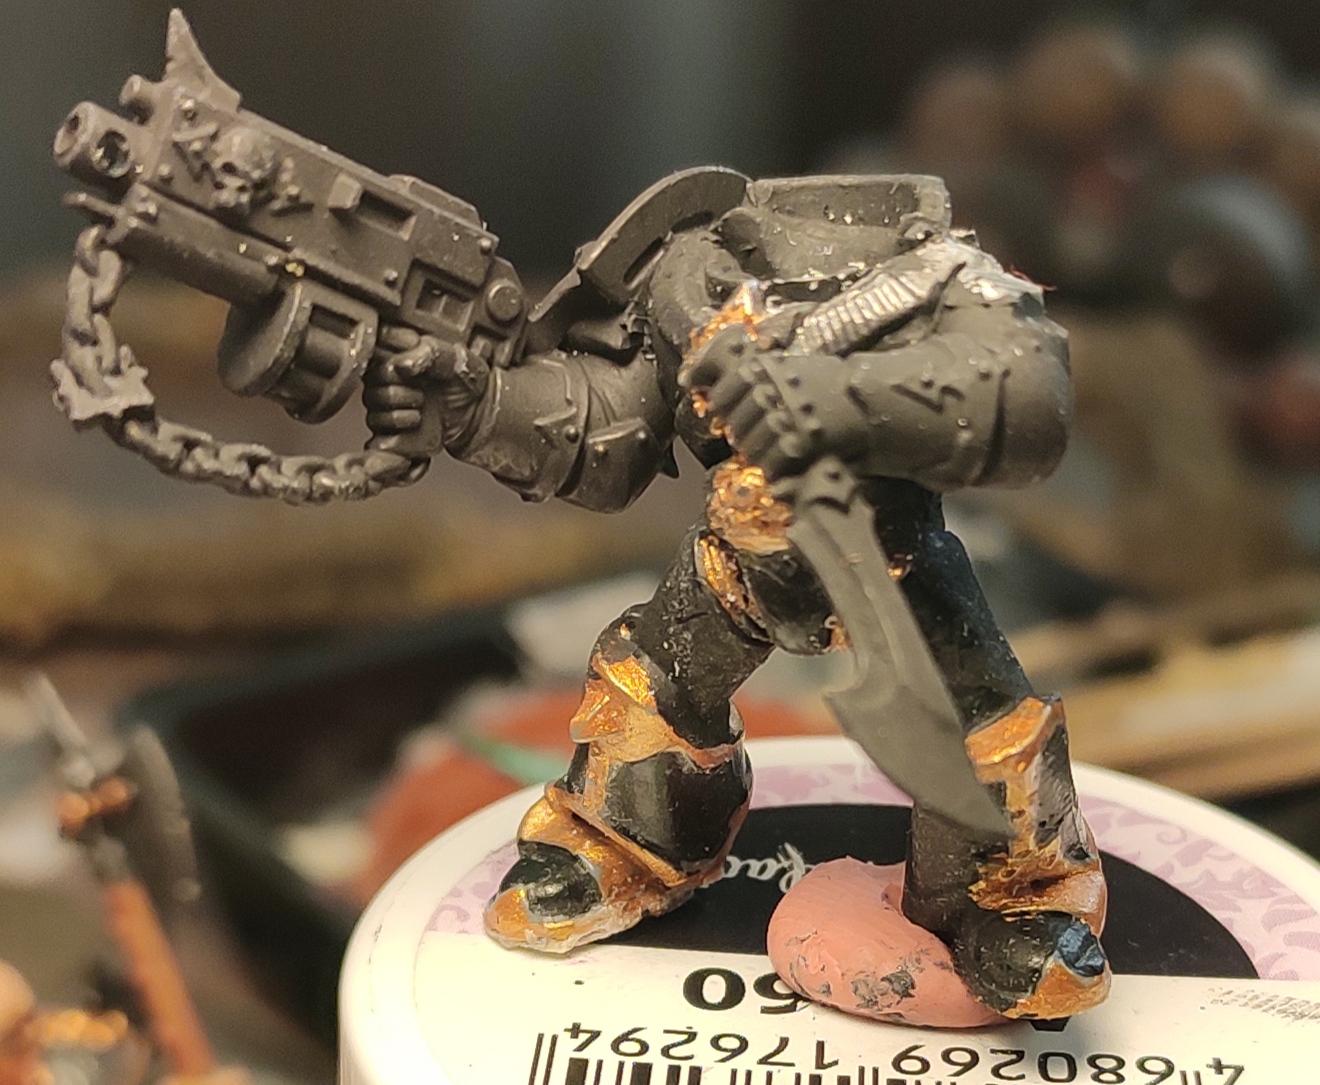 Bolter, Casting, Chaos, Chaos Space Marines, Conversion, Epoxy, Heresy, Heretic Astartes, Infantry, Kitbash, Putty, Sword, Traitor Legions, Warhammer 40,000, Work In Progress